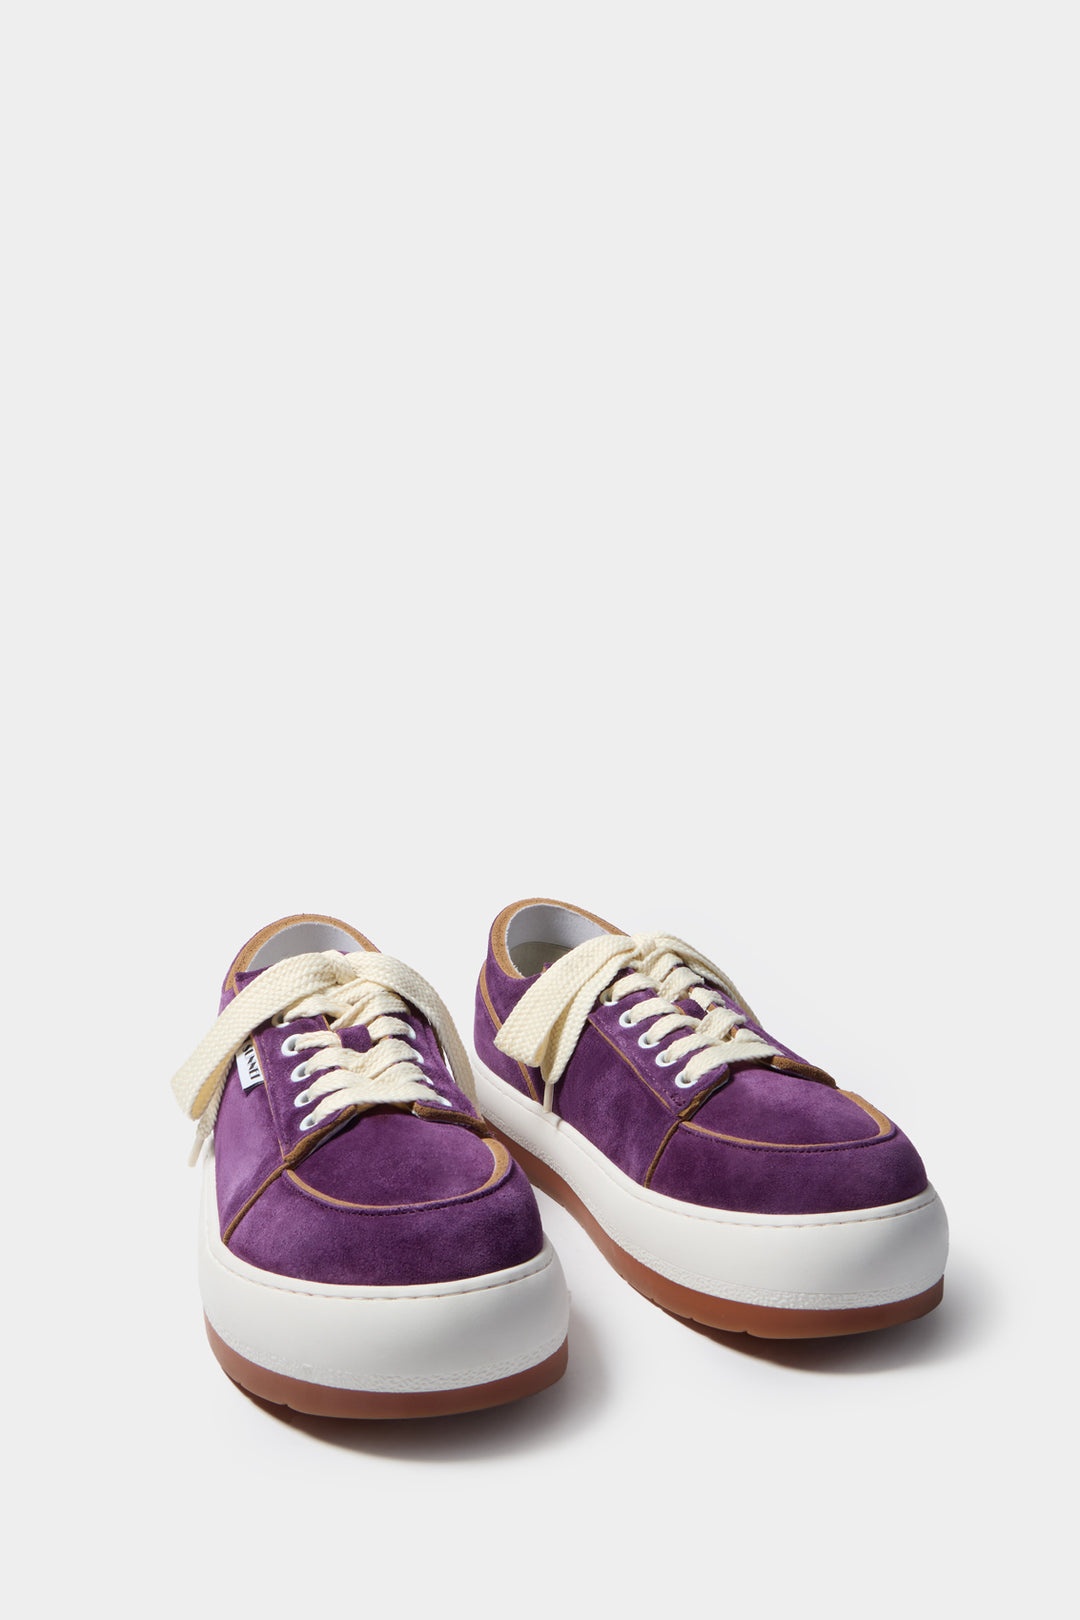 DREAMY SHOES / suede / aubergine - 2